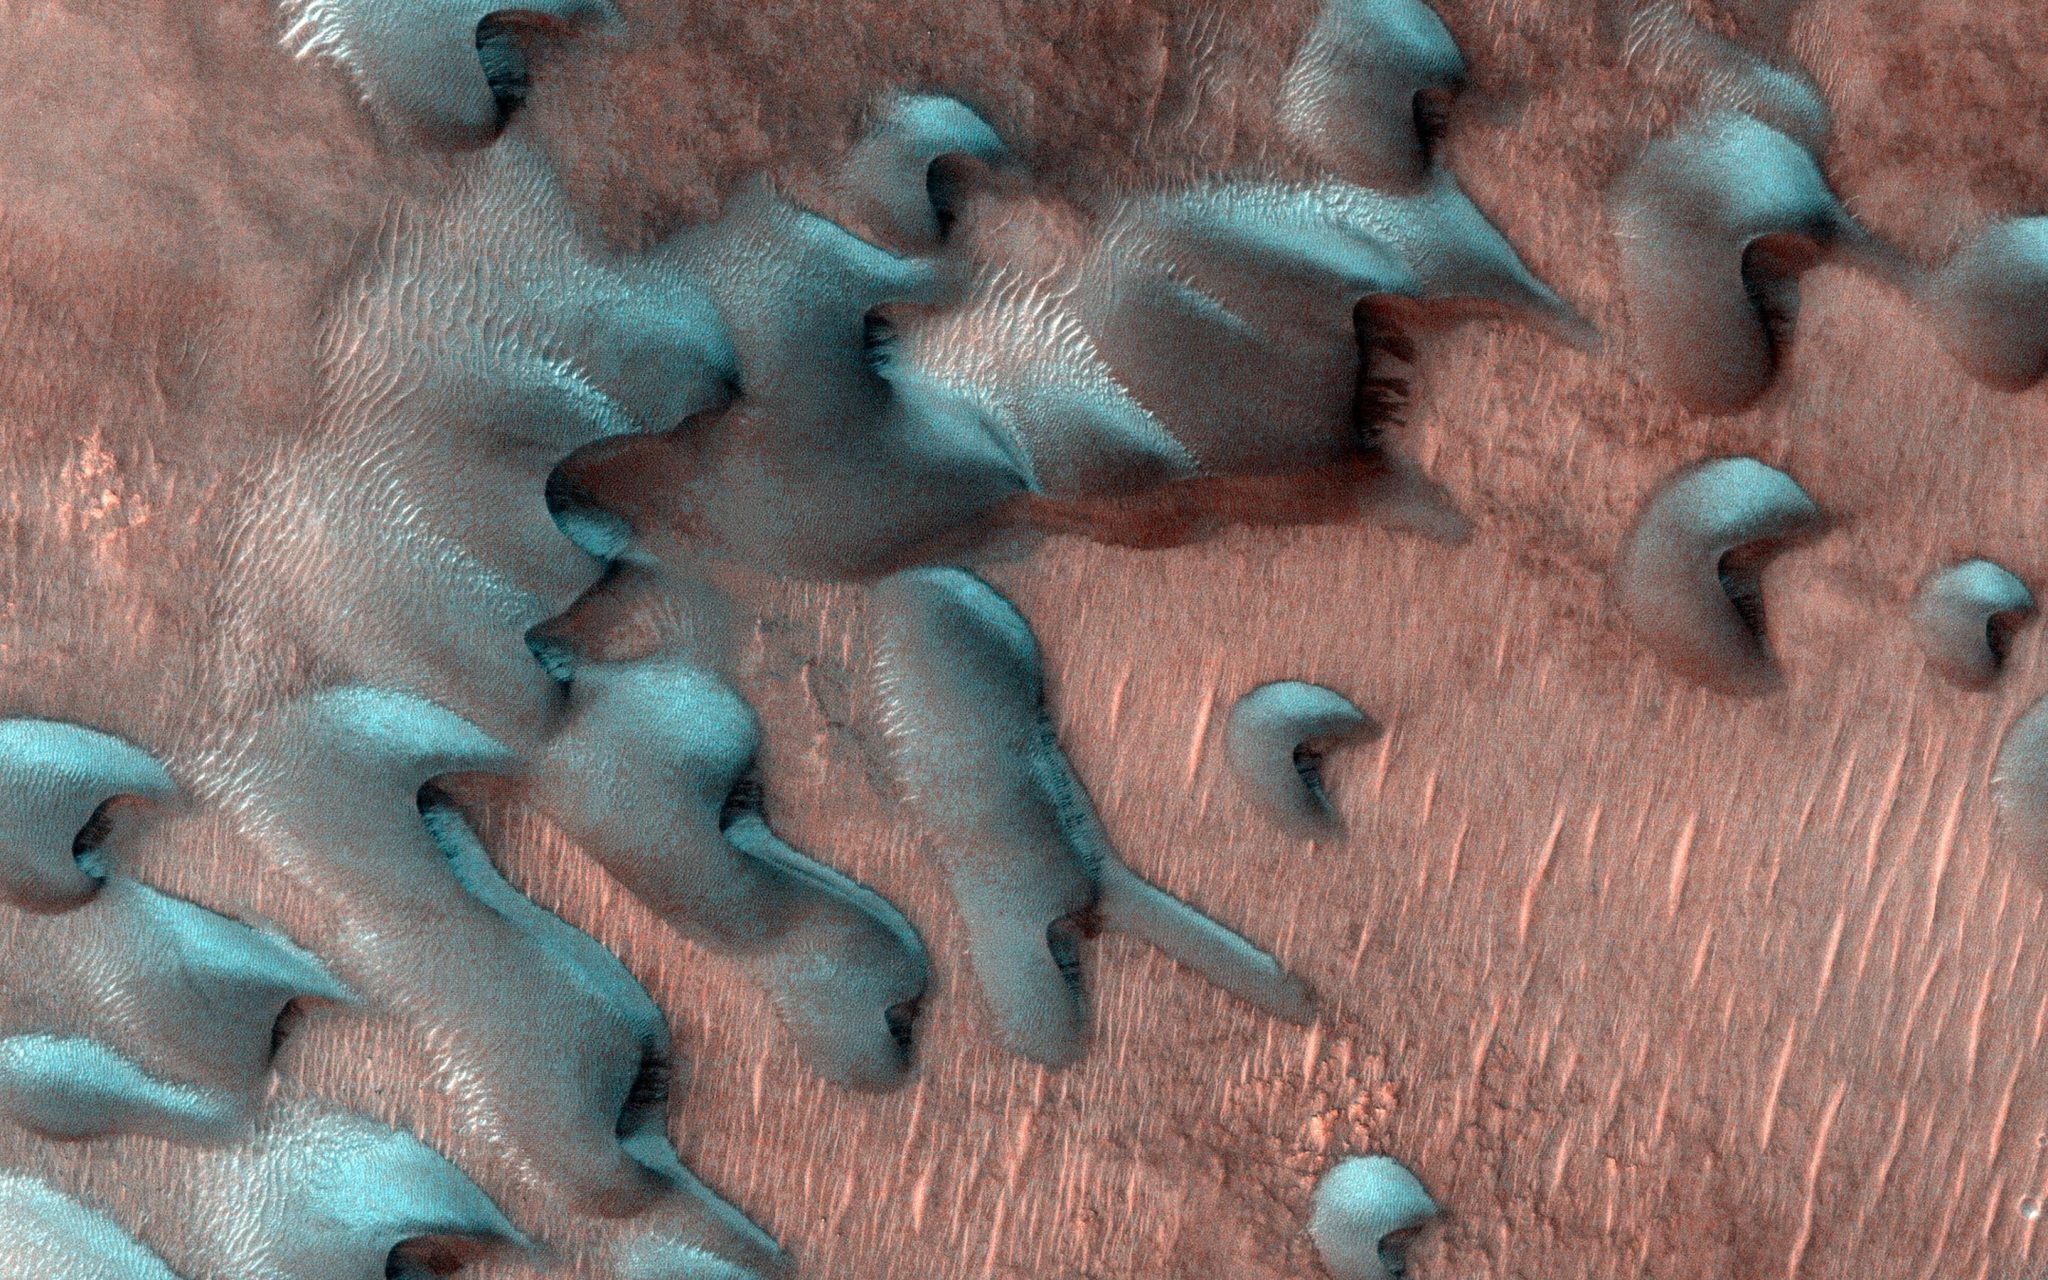 NASA explores a winter wonderland on Mars – alien holiday scene with cube-shaped snow